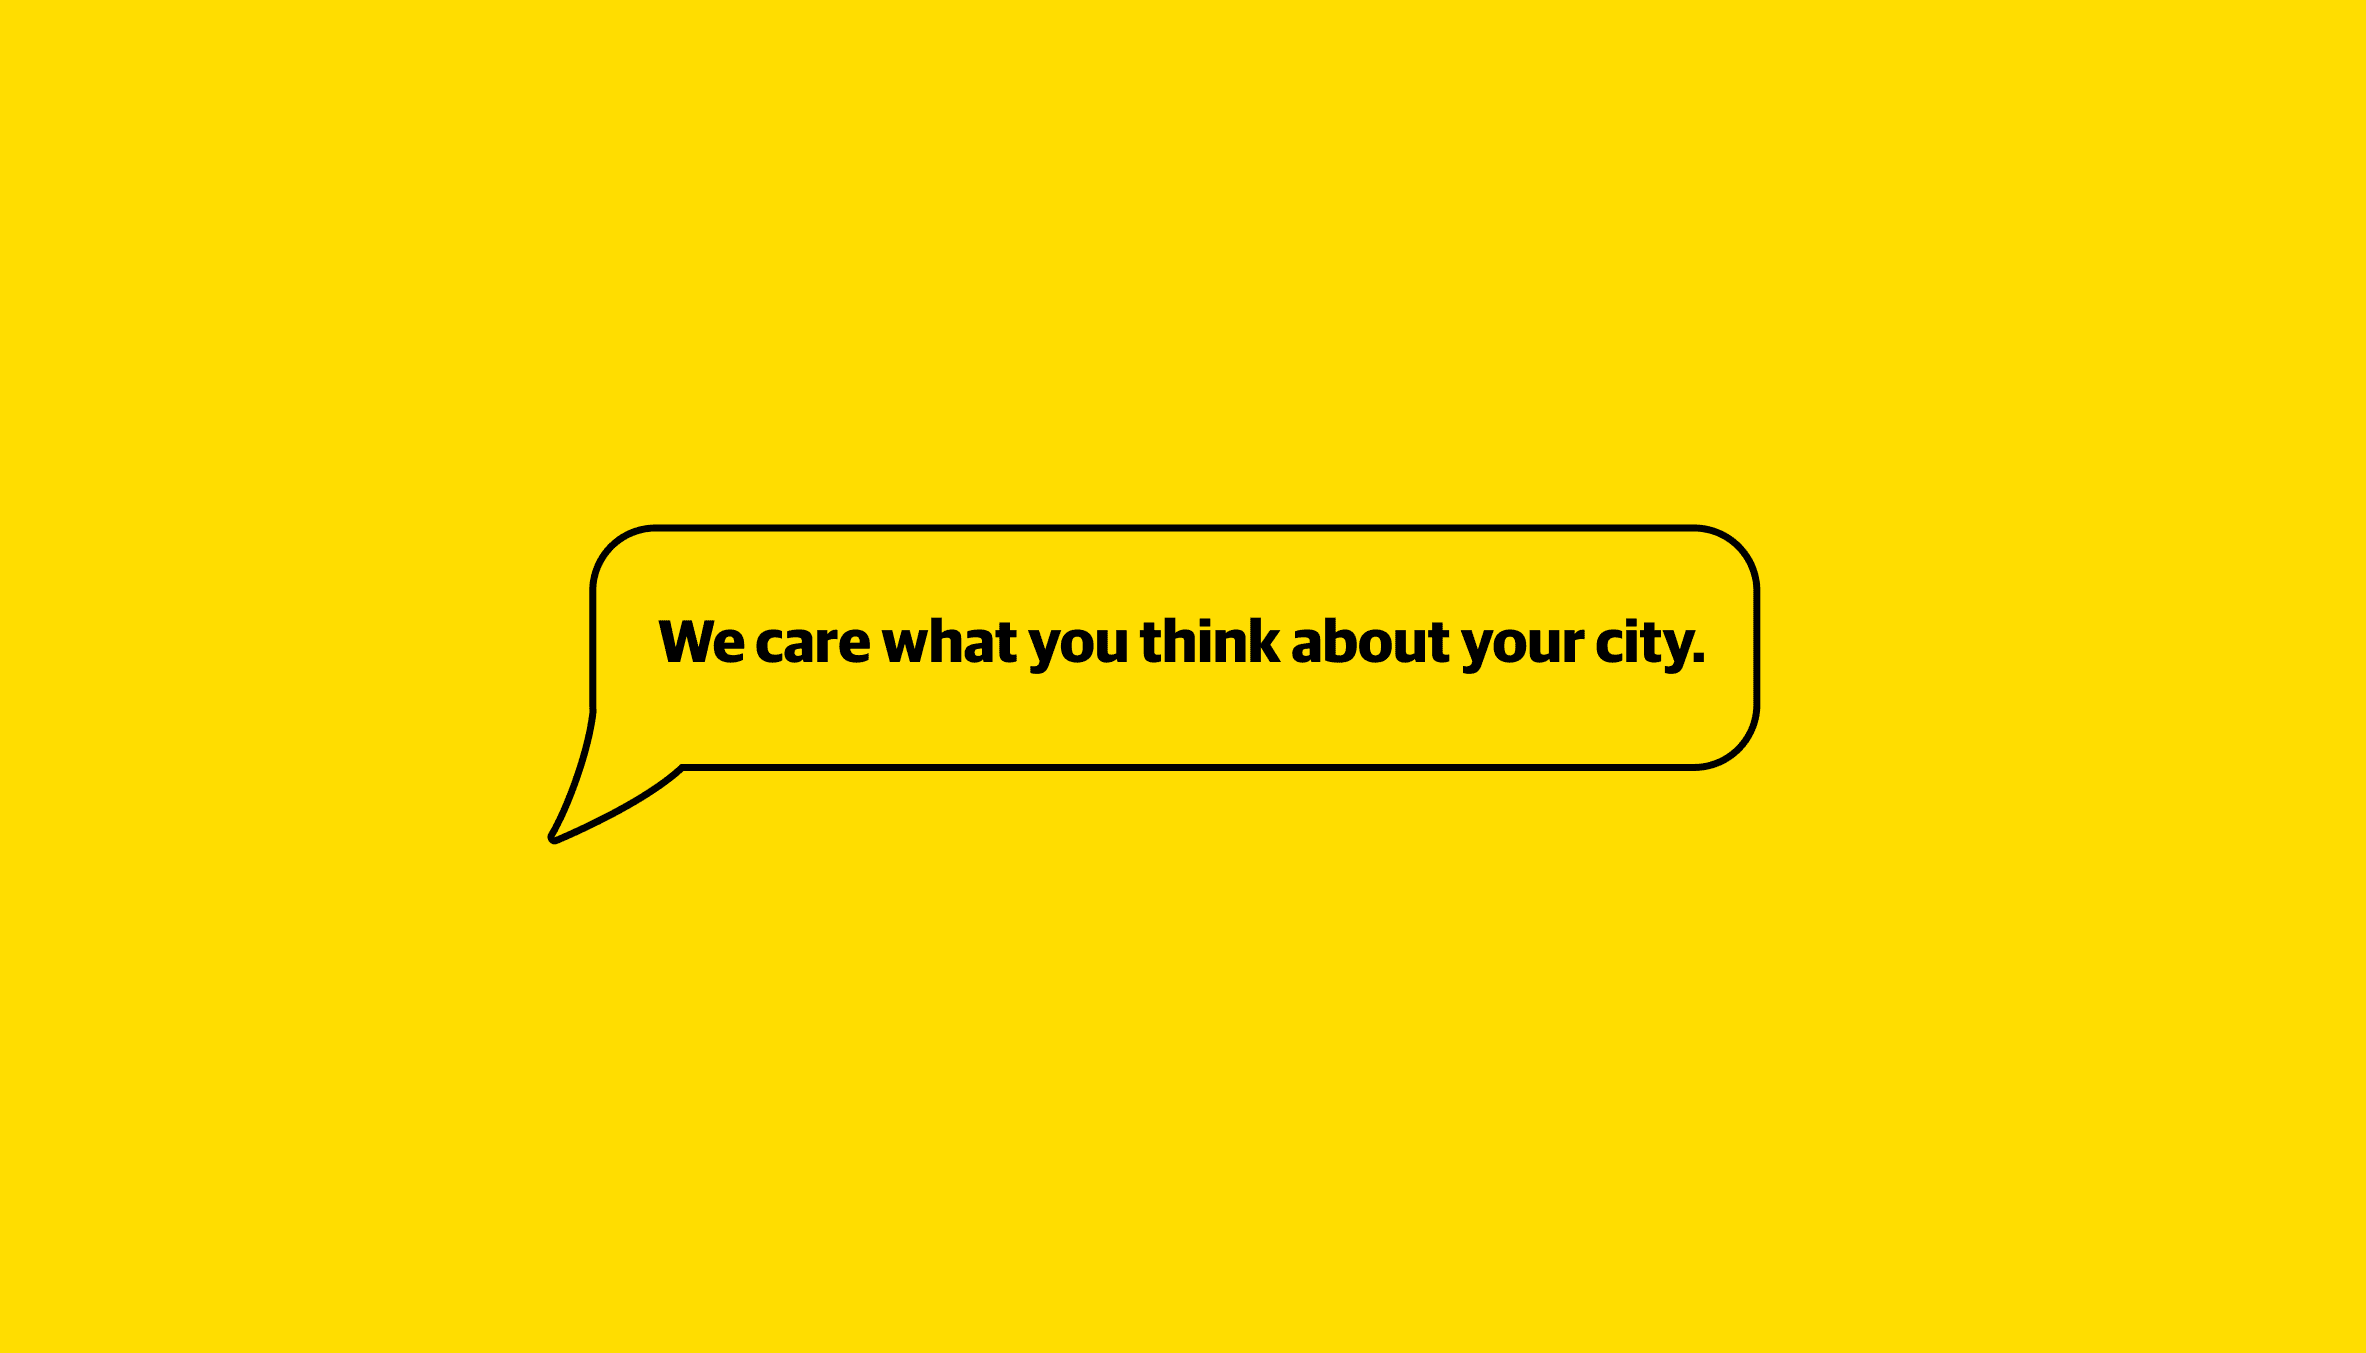 A speech bubble with the words "we care what you think about your city" inside